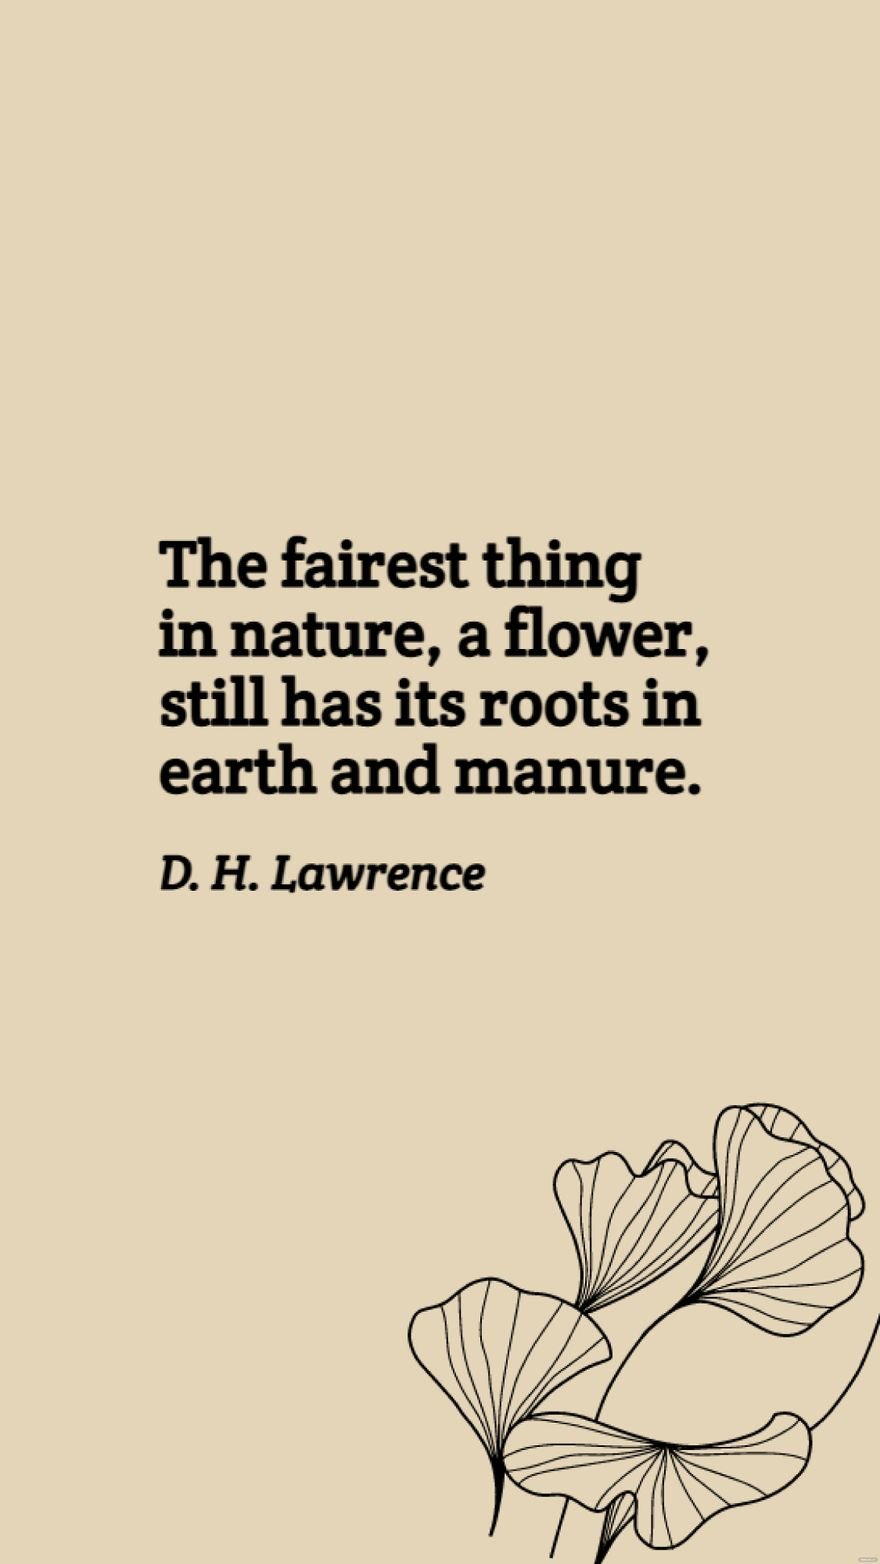 D. H. Lawrence - The fairest thing in nature, a flower, still has its roots in earth and manure.